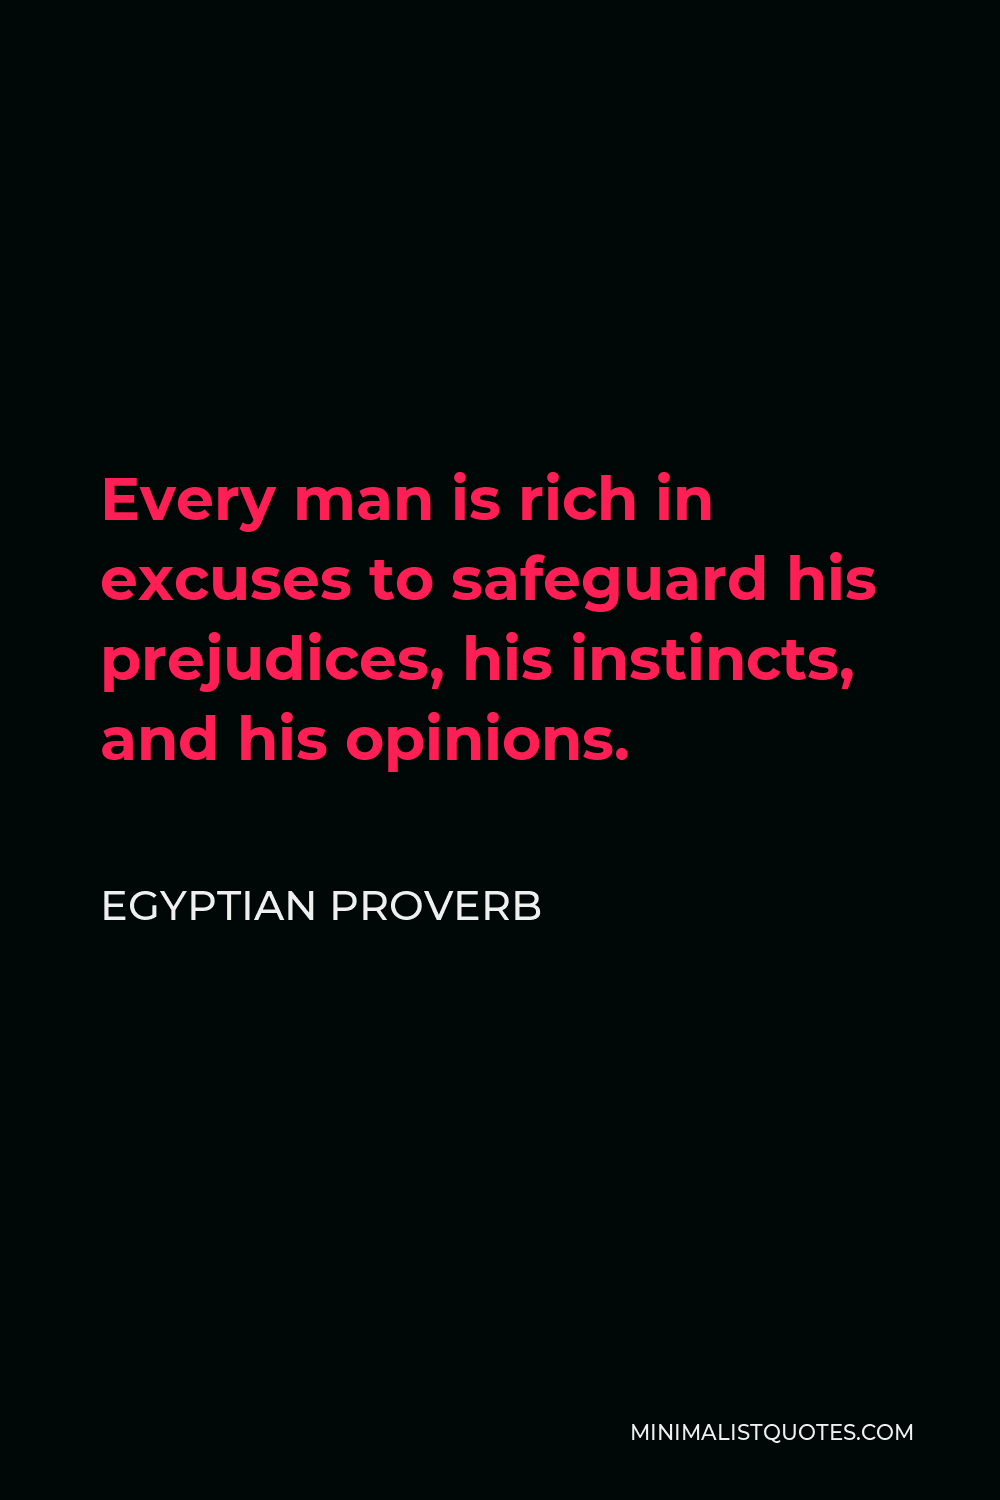 Egyptian Proverb Quote - Every man is rich in excuses to safeguard his prejudices, his instincts, and his opinions.